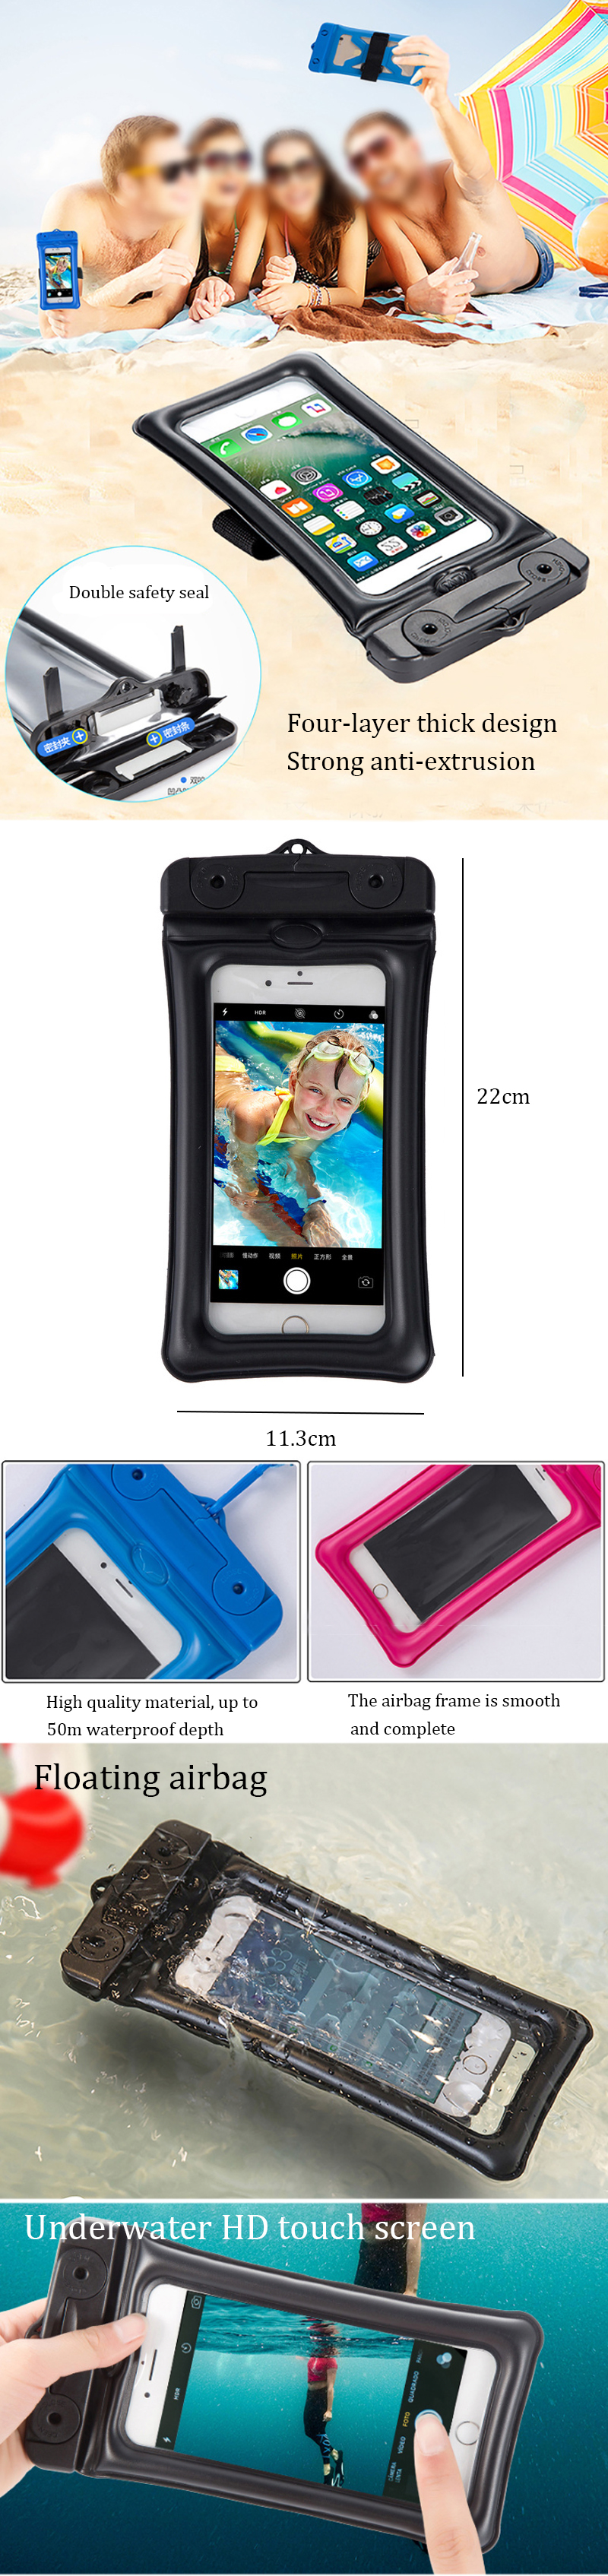 IPReereg-6-Inch-IPX8-Waterproof-Mobile-Phone-Bag-Pouch-Touch-Screen-Cell-Phone-Holder-Cover-For-iPho-1370094-1